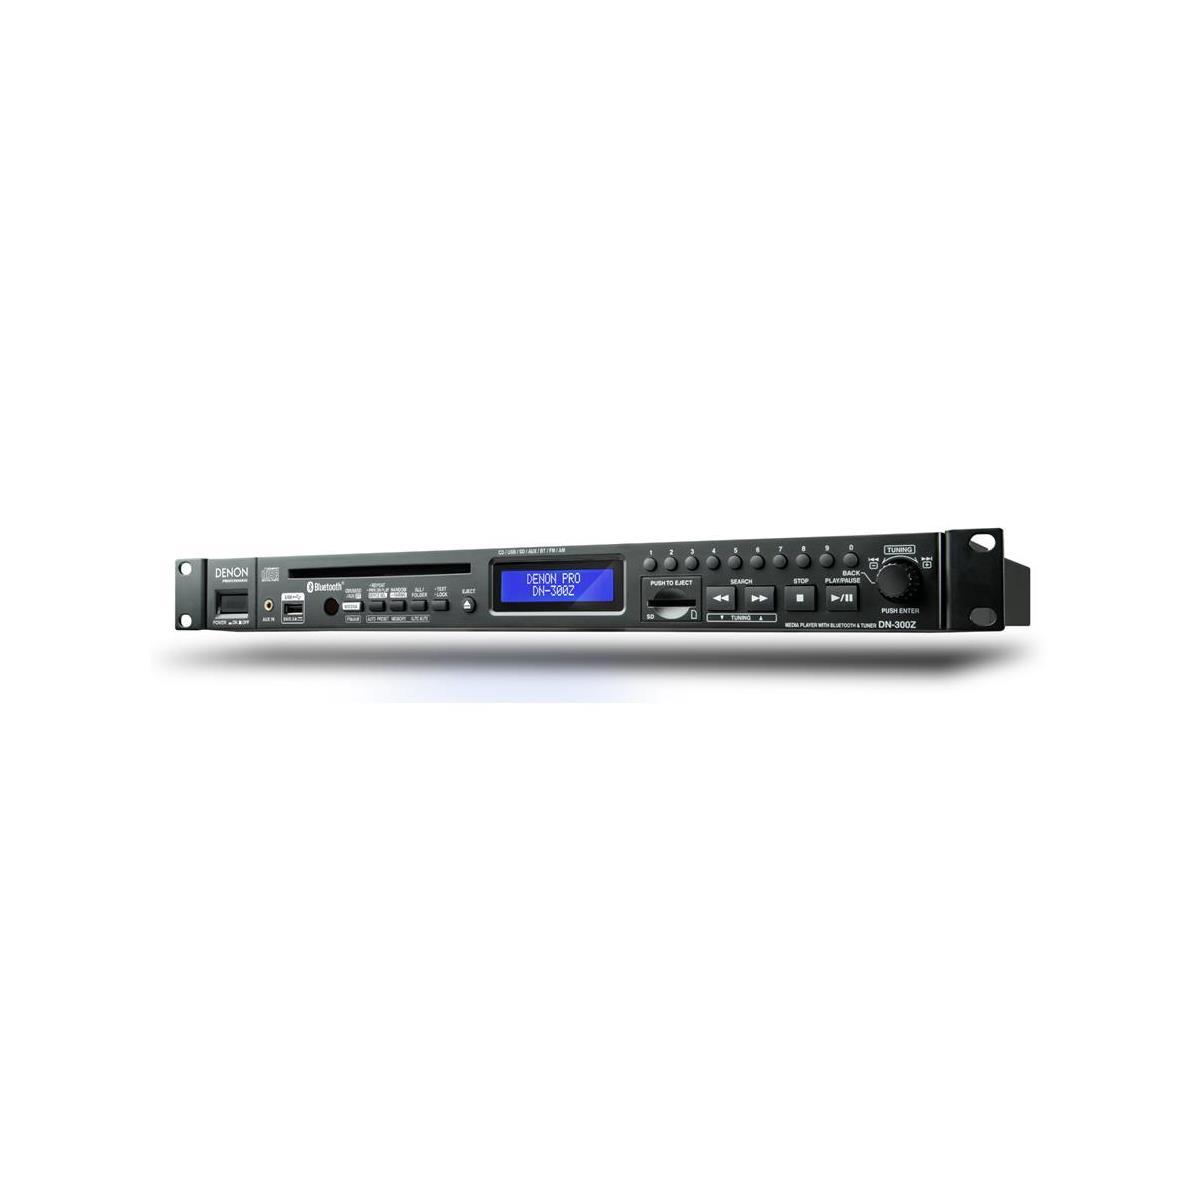 Image of Denon Pro Denon DN-300Z CD/Media Player with Bluetooth Receiver and AM/FM Tuner